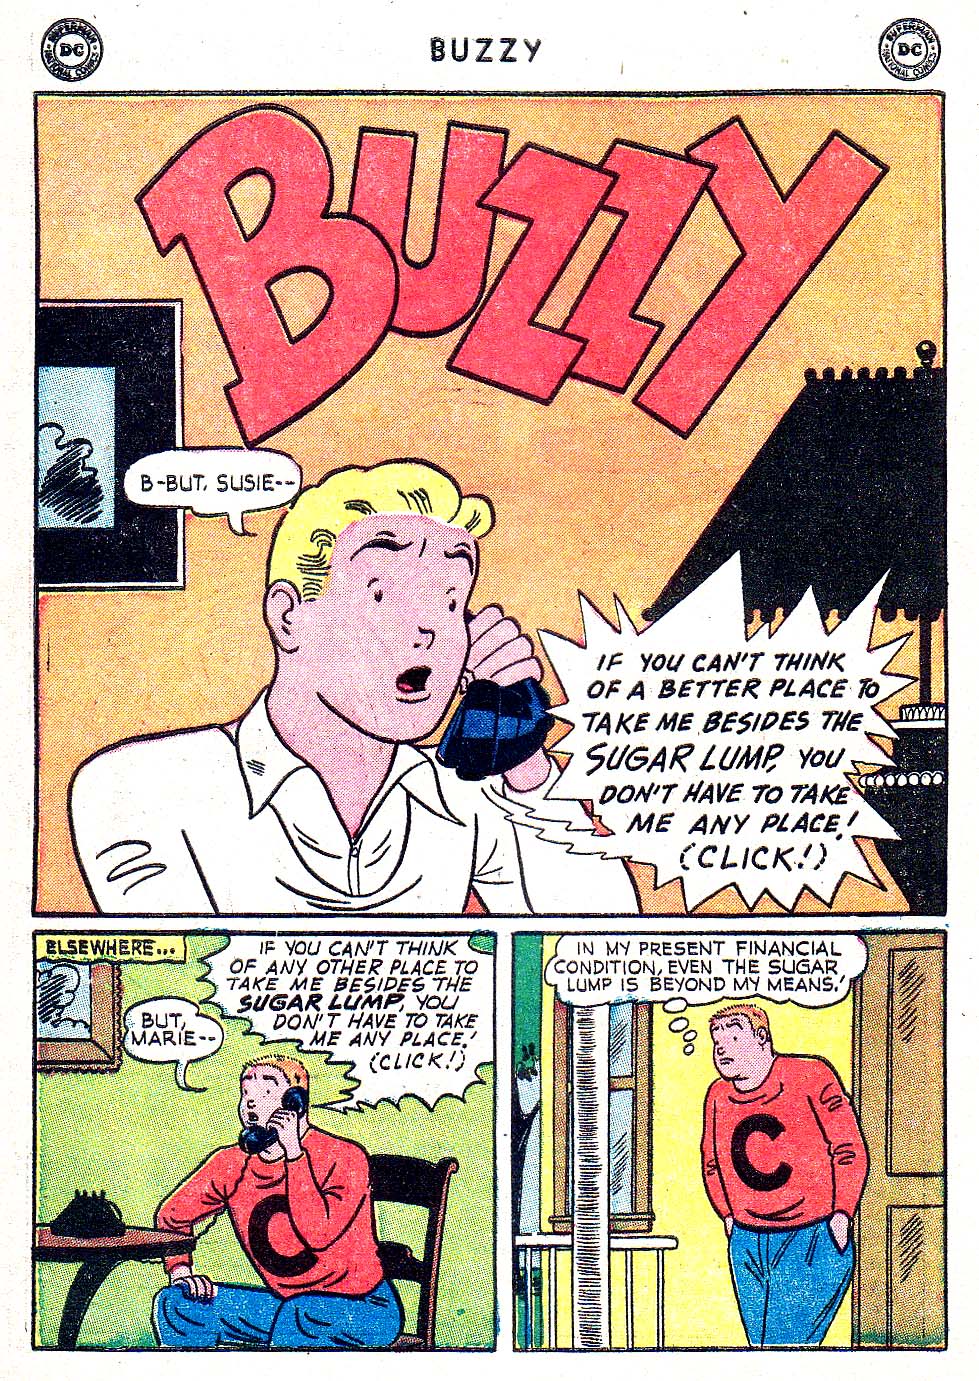 Read online Buzzy comic -  Issue #57 - 34